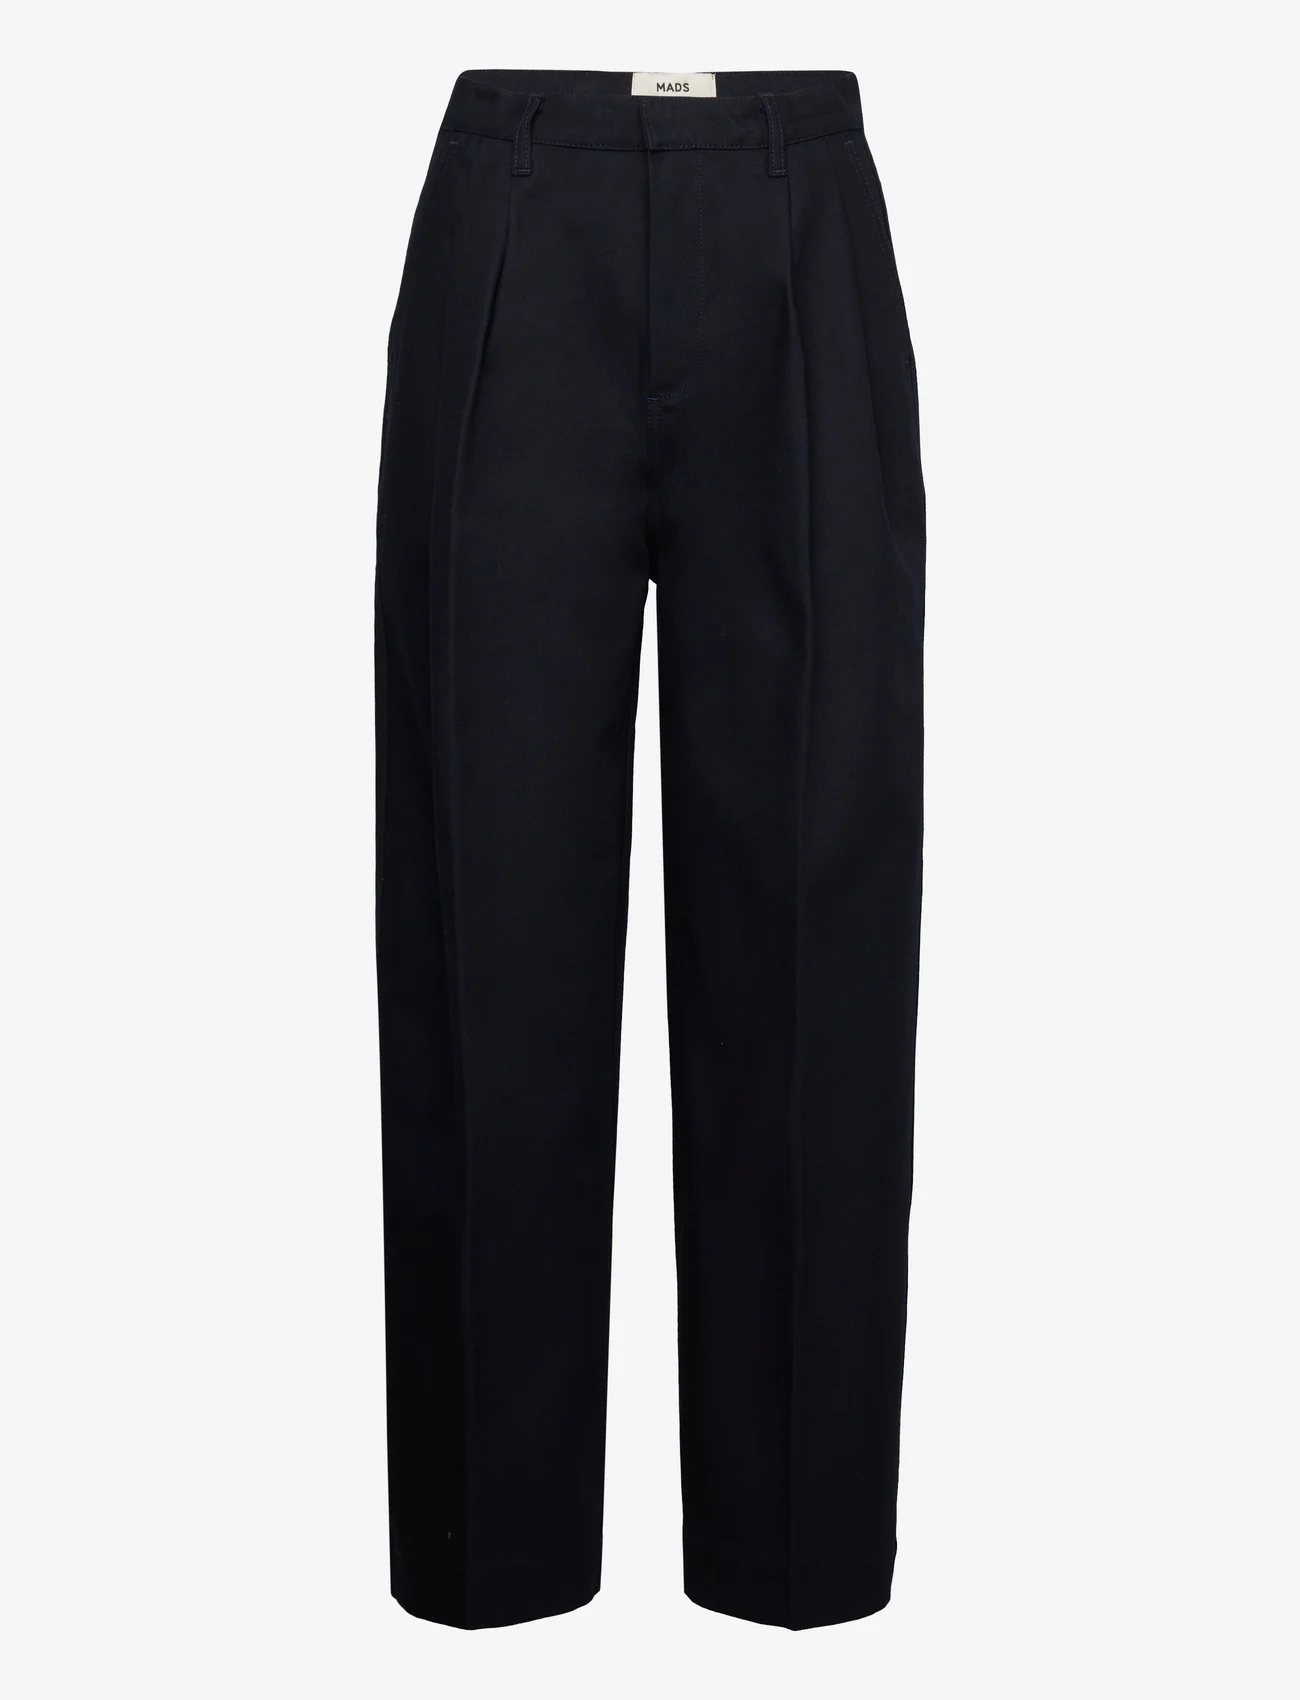 Mads Nørgaard - Heavy Twill Paria Pants - formell - deep well - 0